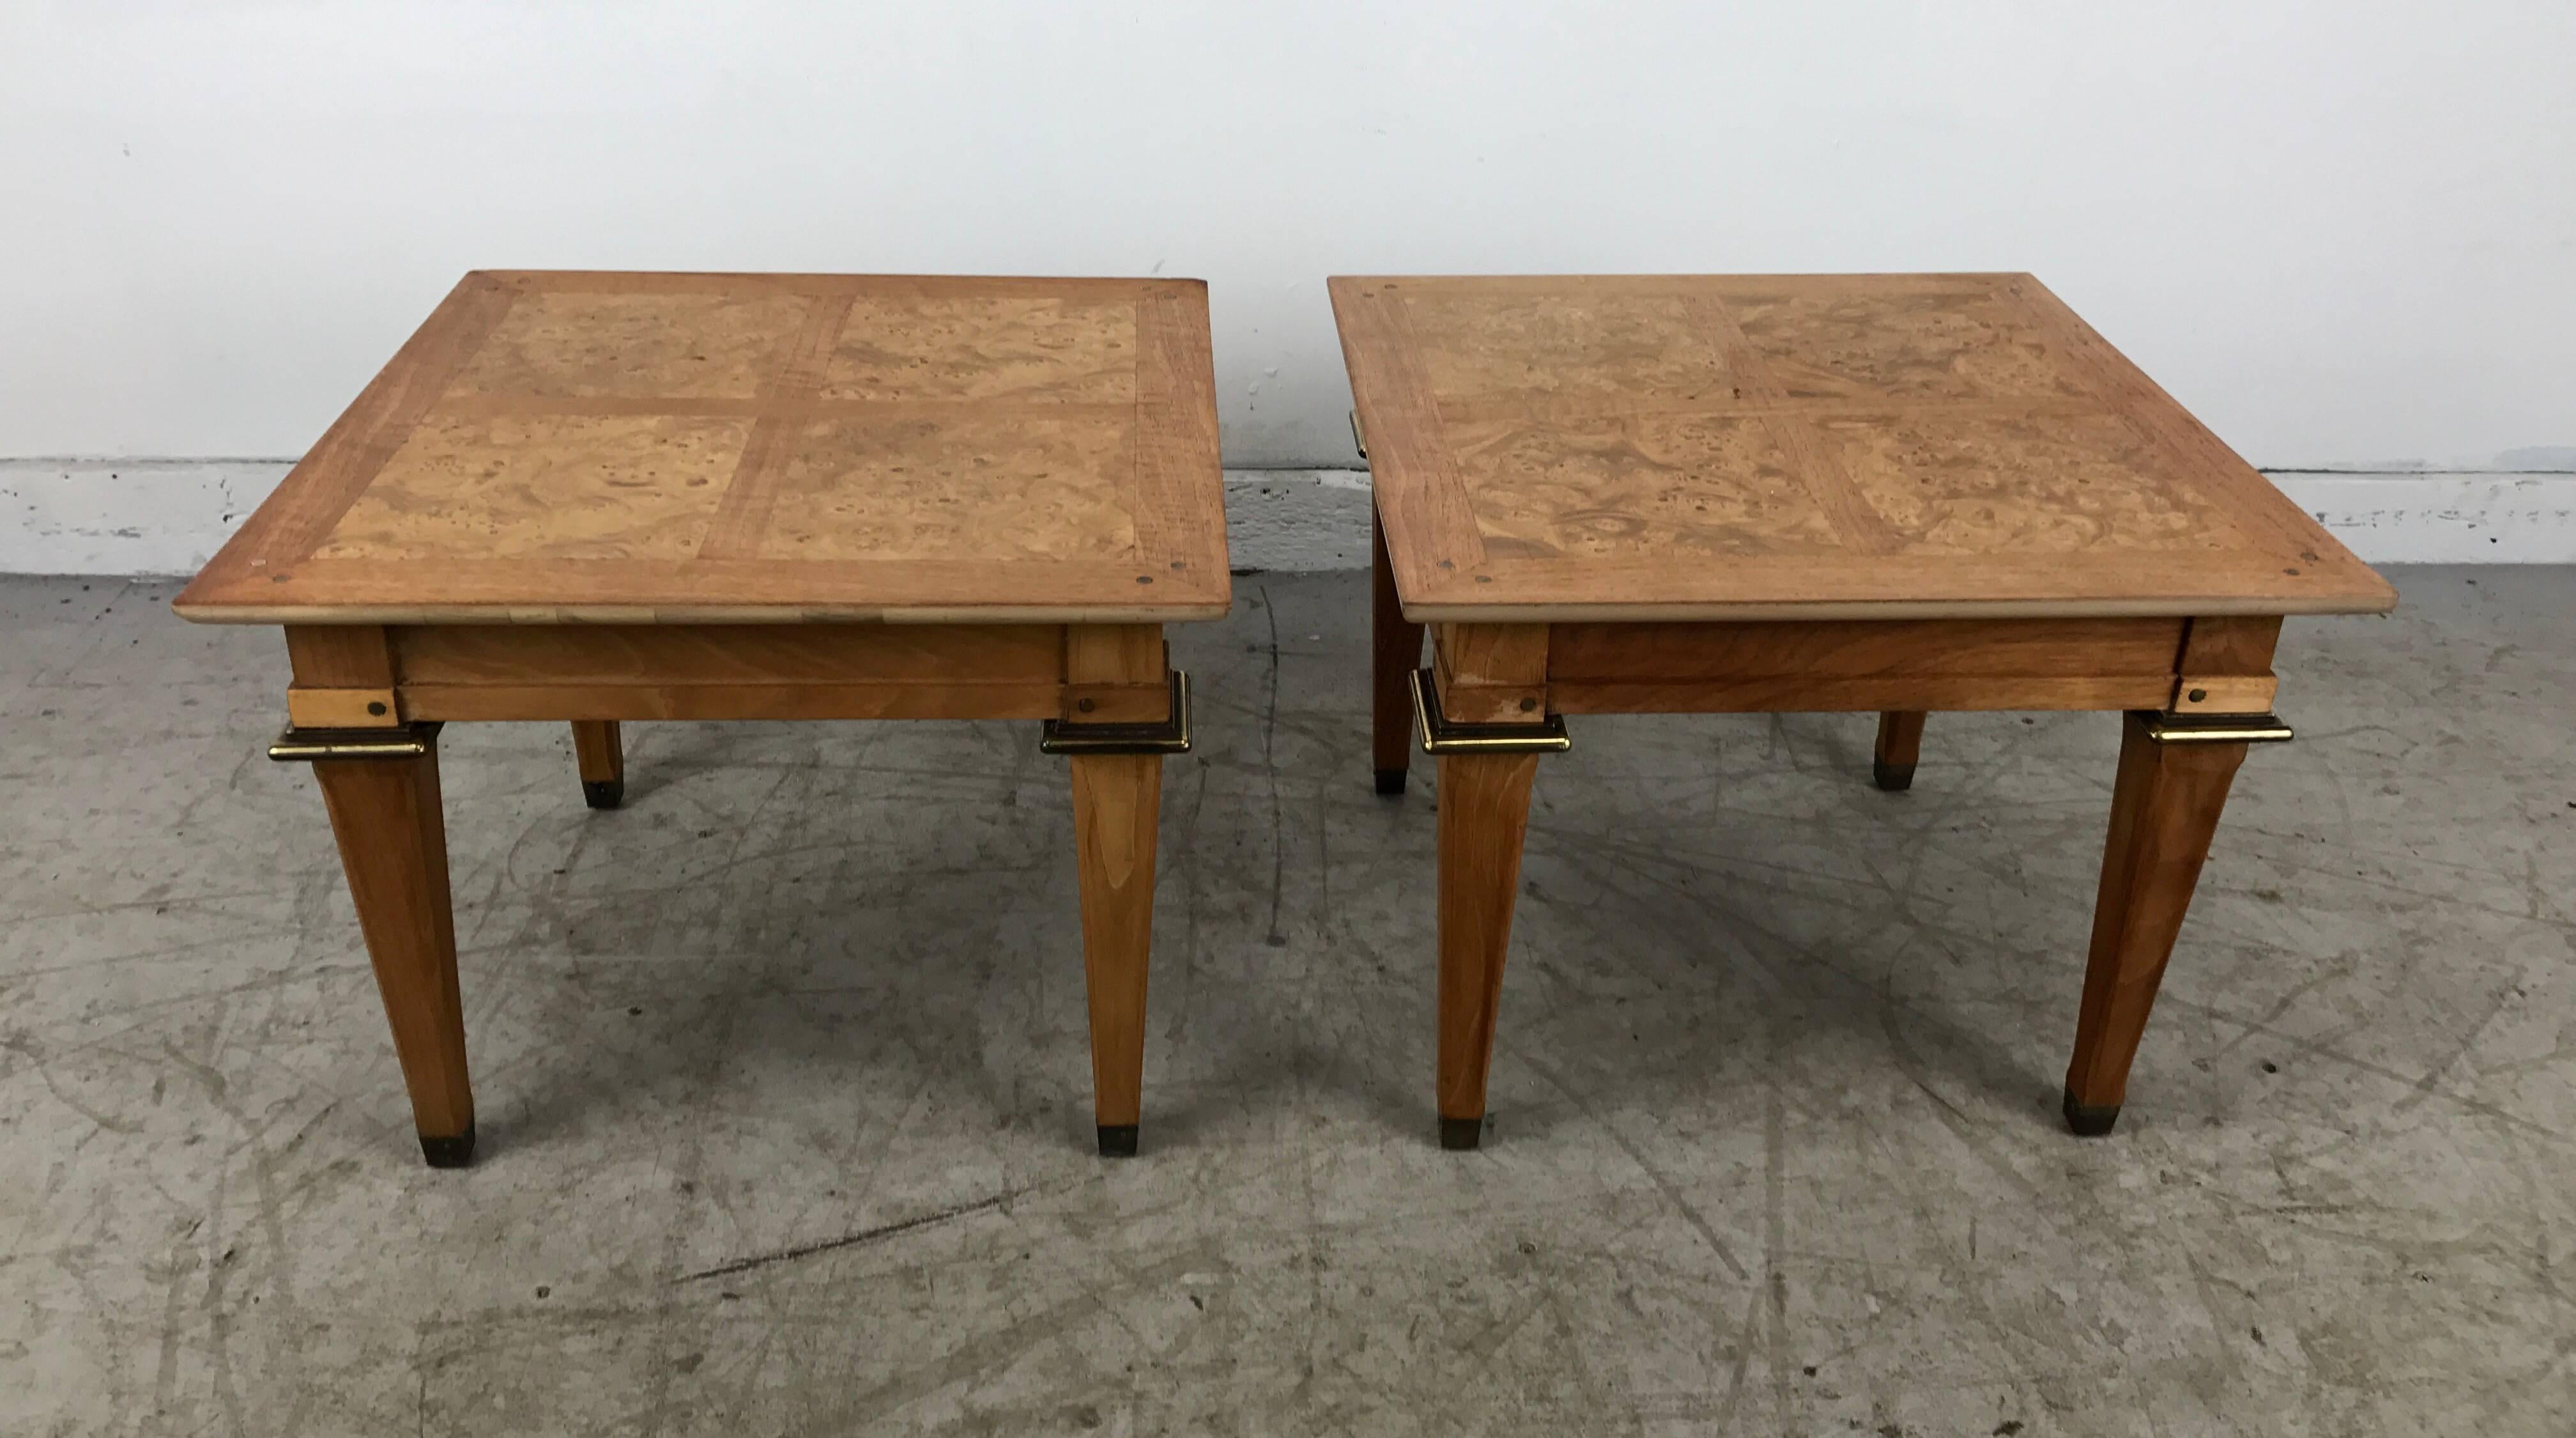 Stunning pair of burl and brass occasional tables by Mastercraft, Classic Regency traditional design, burl wood tops. Brass inlay (dot) accents, brass detail trim to top legs.